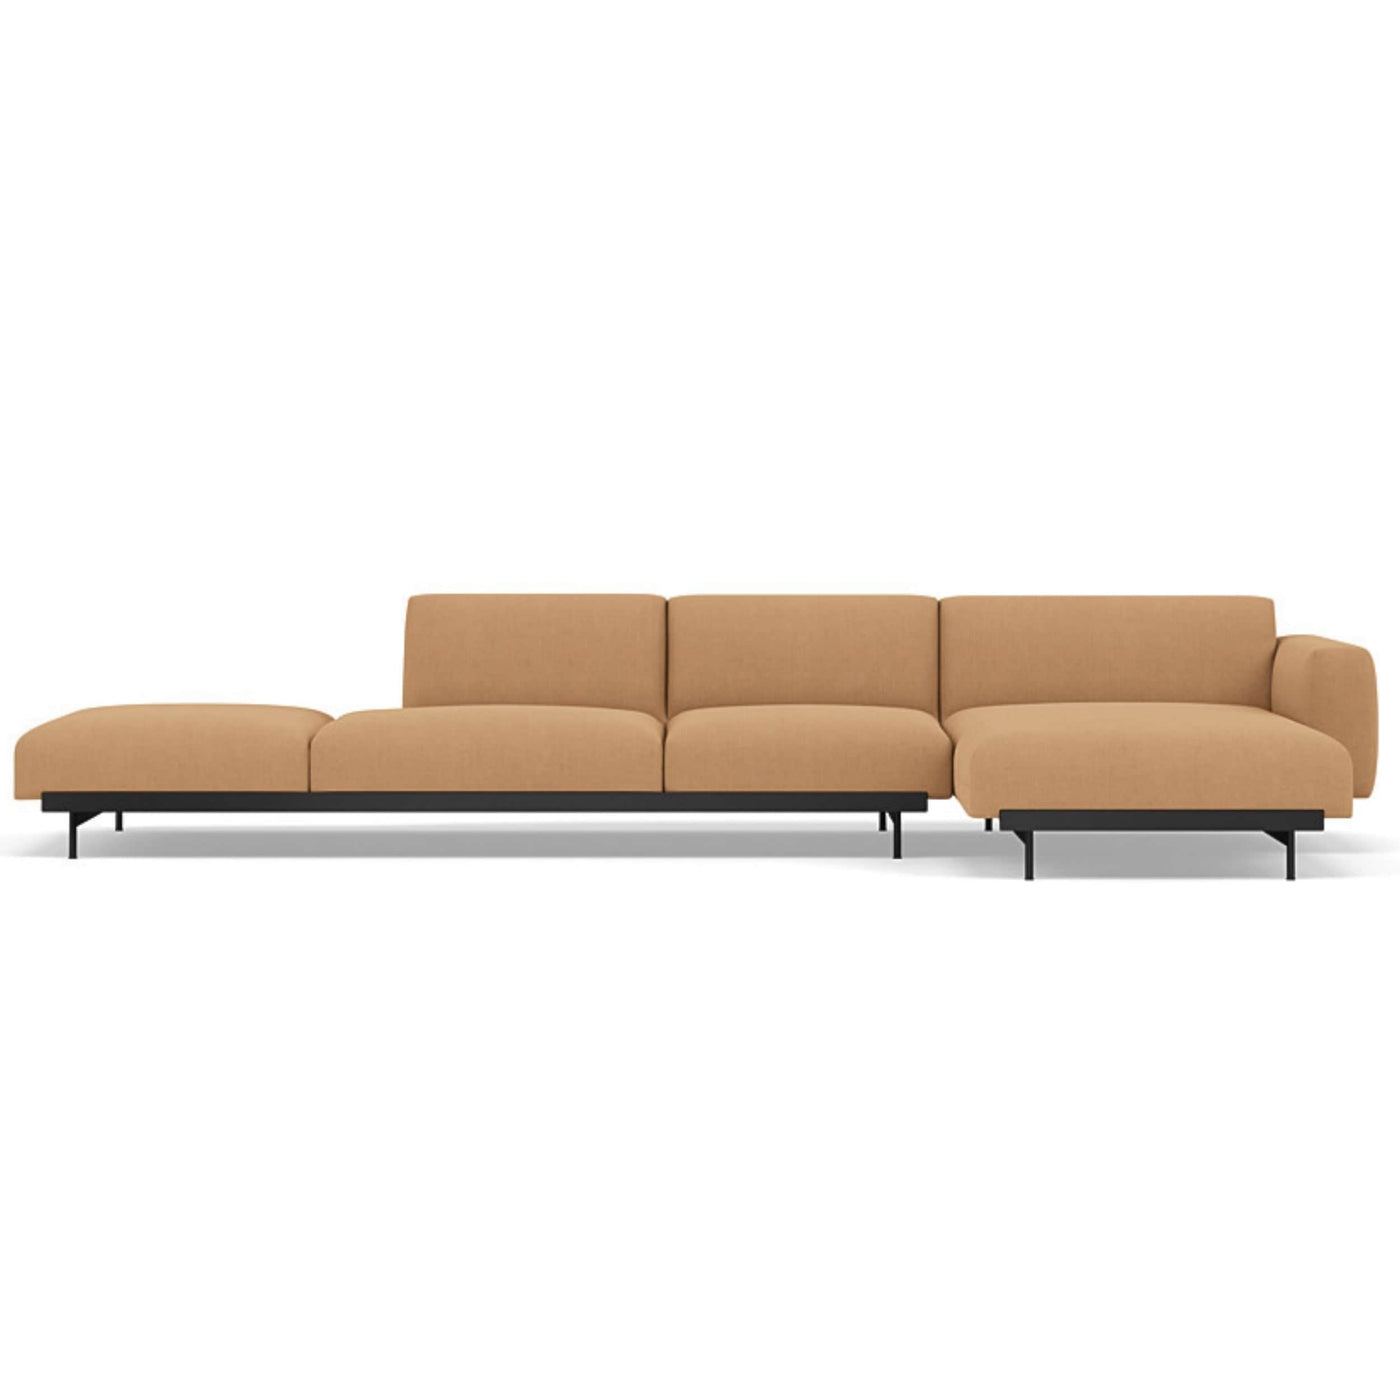 Muuto In Situ Modular 4 Seater Sofa configuration 4 in fiord 451. Made to order from someday designs. #colour_fiord-451